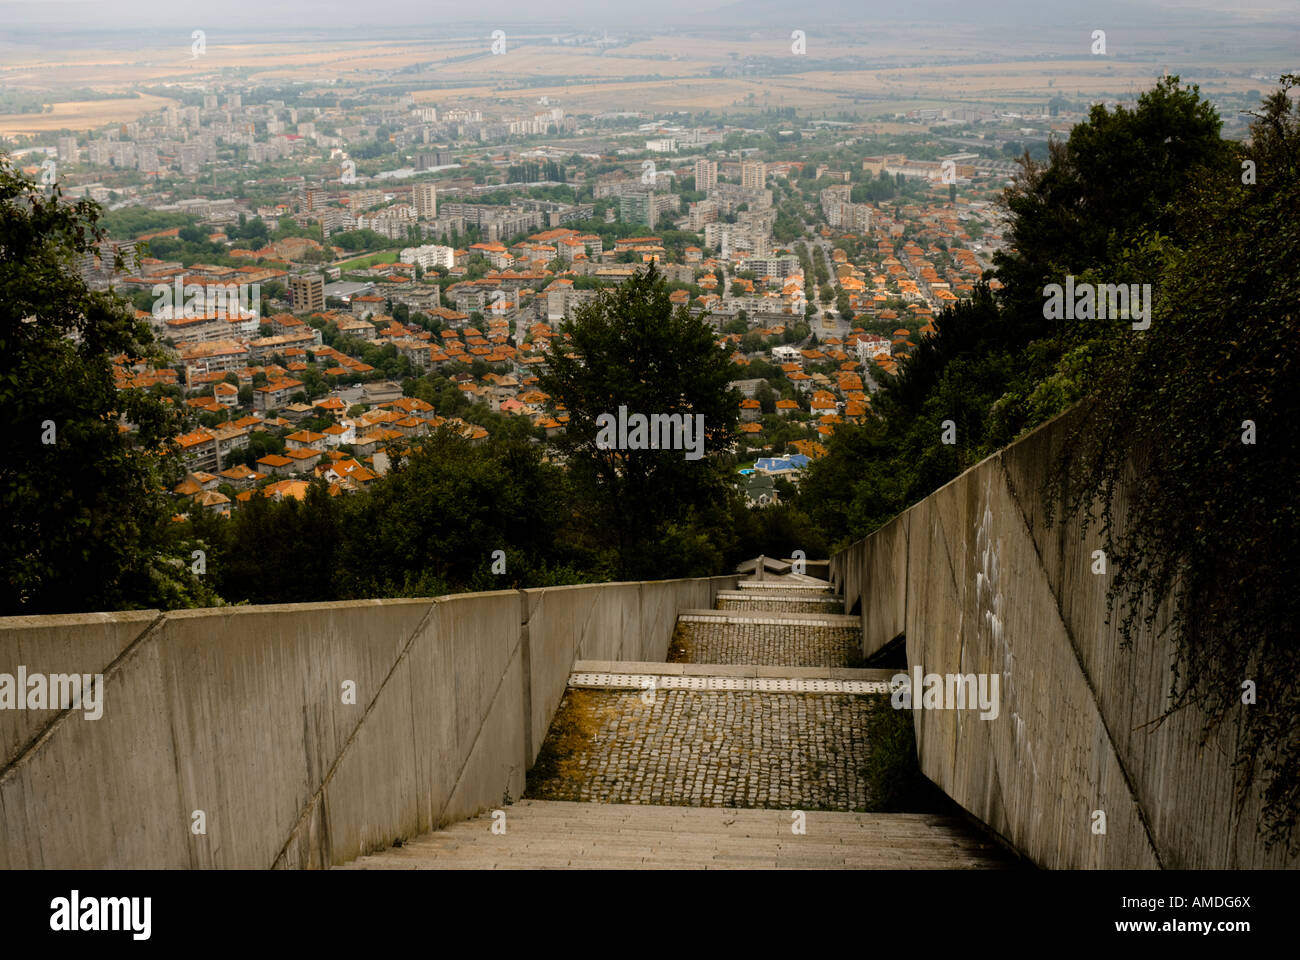 Communist era monument. Looking down the steps to the town of Shumen, Bulgaria Stock Photo